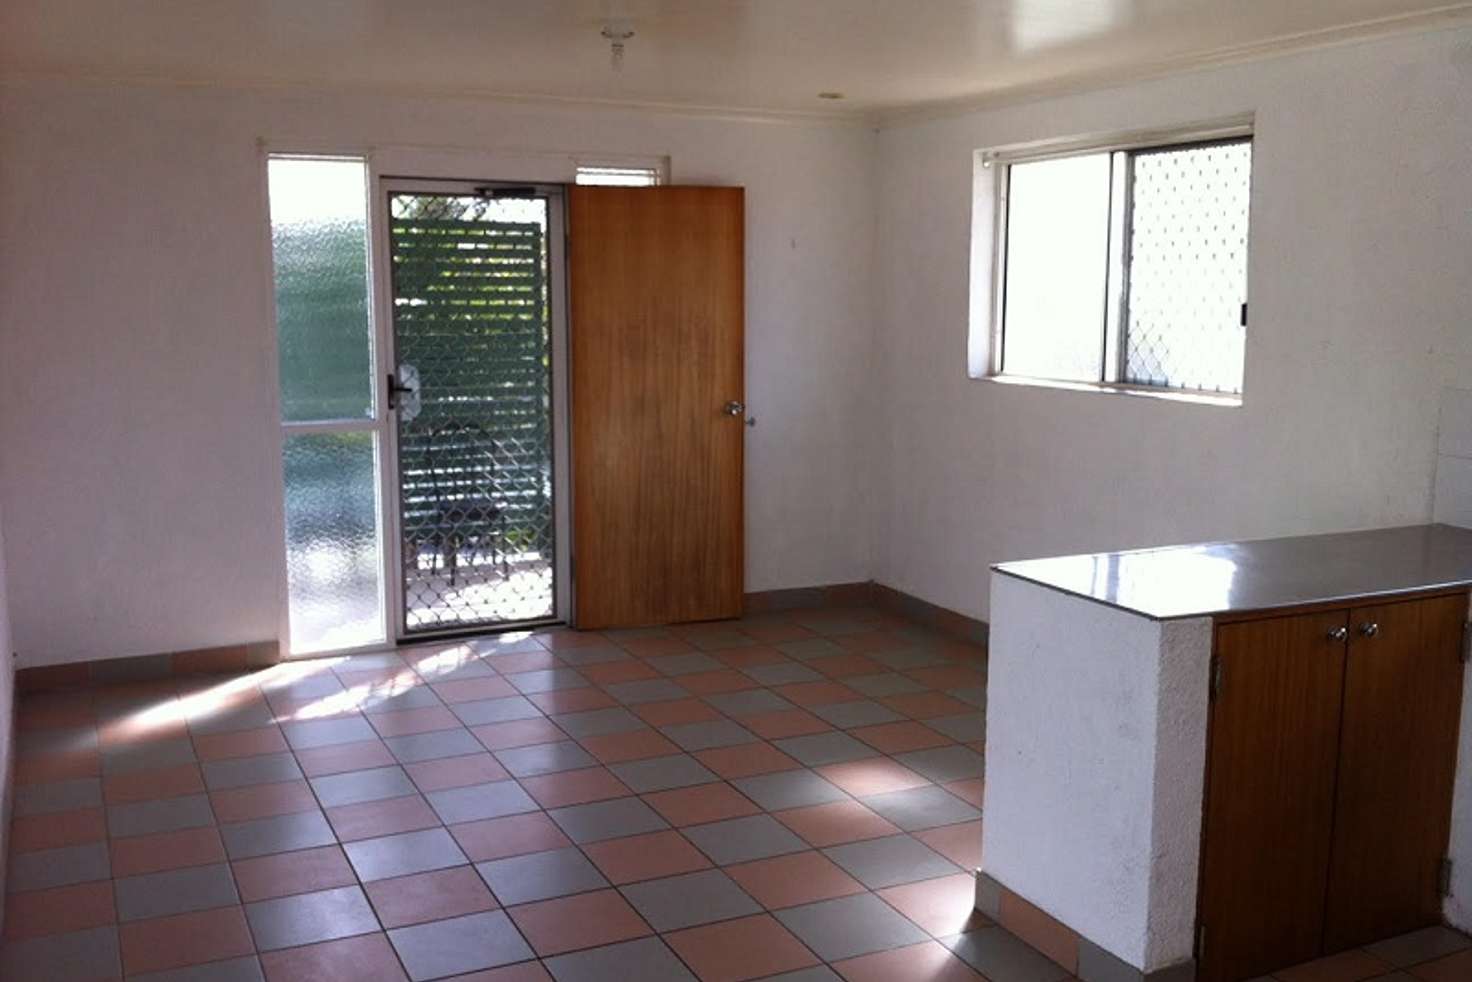 Main view of Homely apartment listing, 29 Pembroke Street, Carina QLD 4152